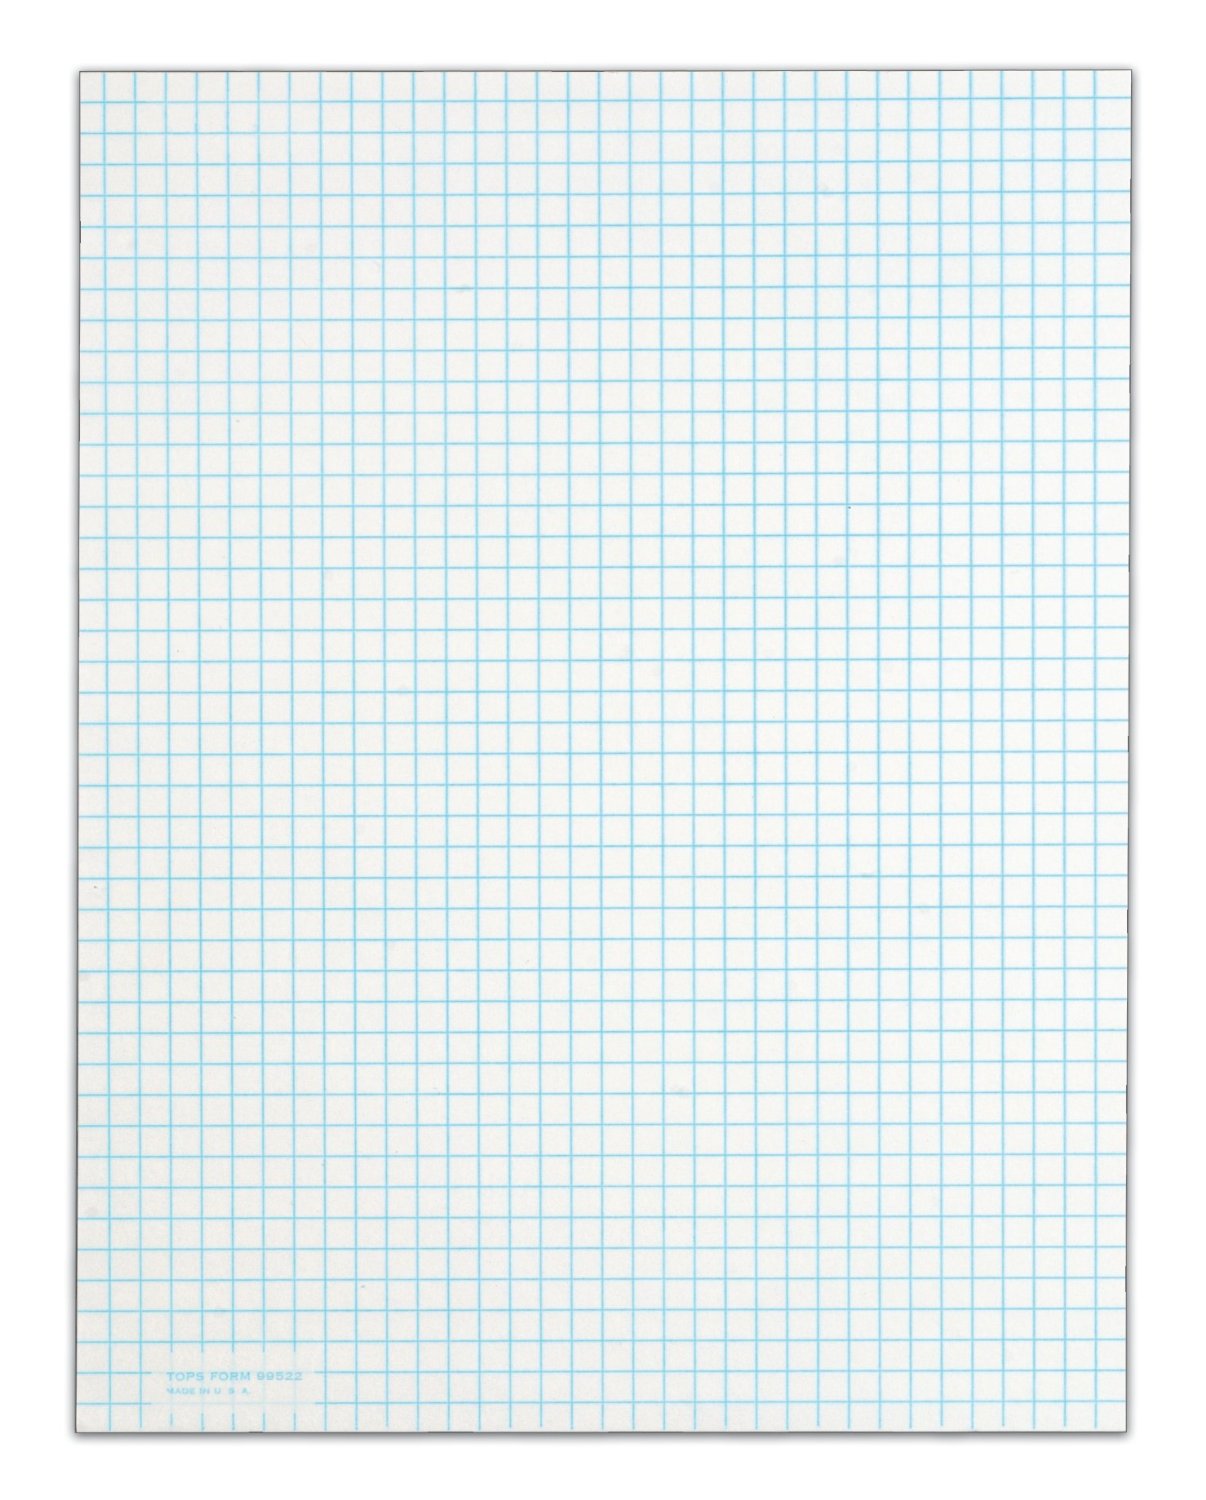 Search Results For Graph Paper Template 8 5 X 11 Calendar 2015